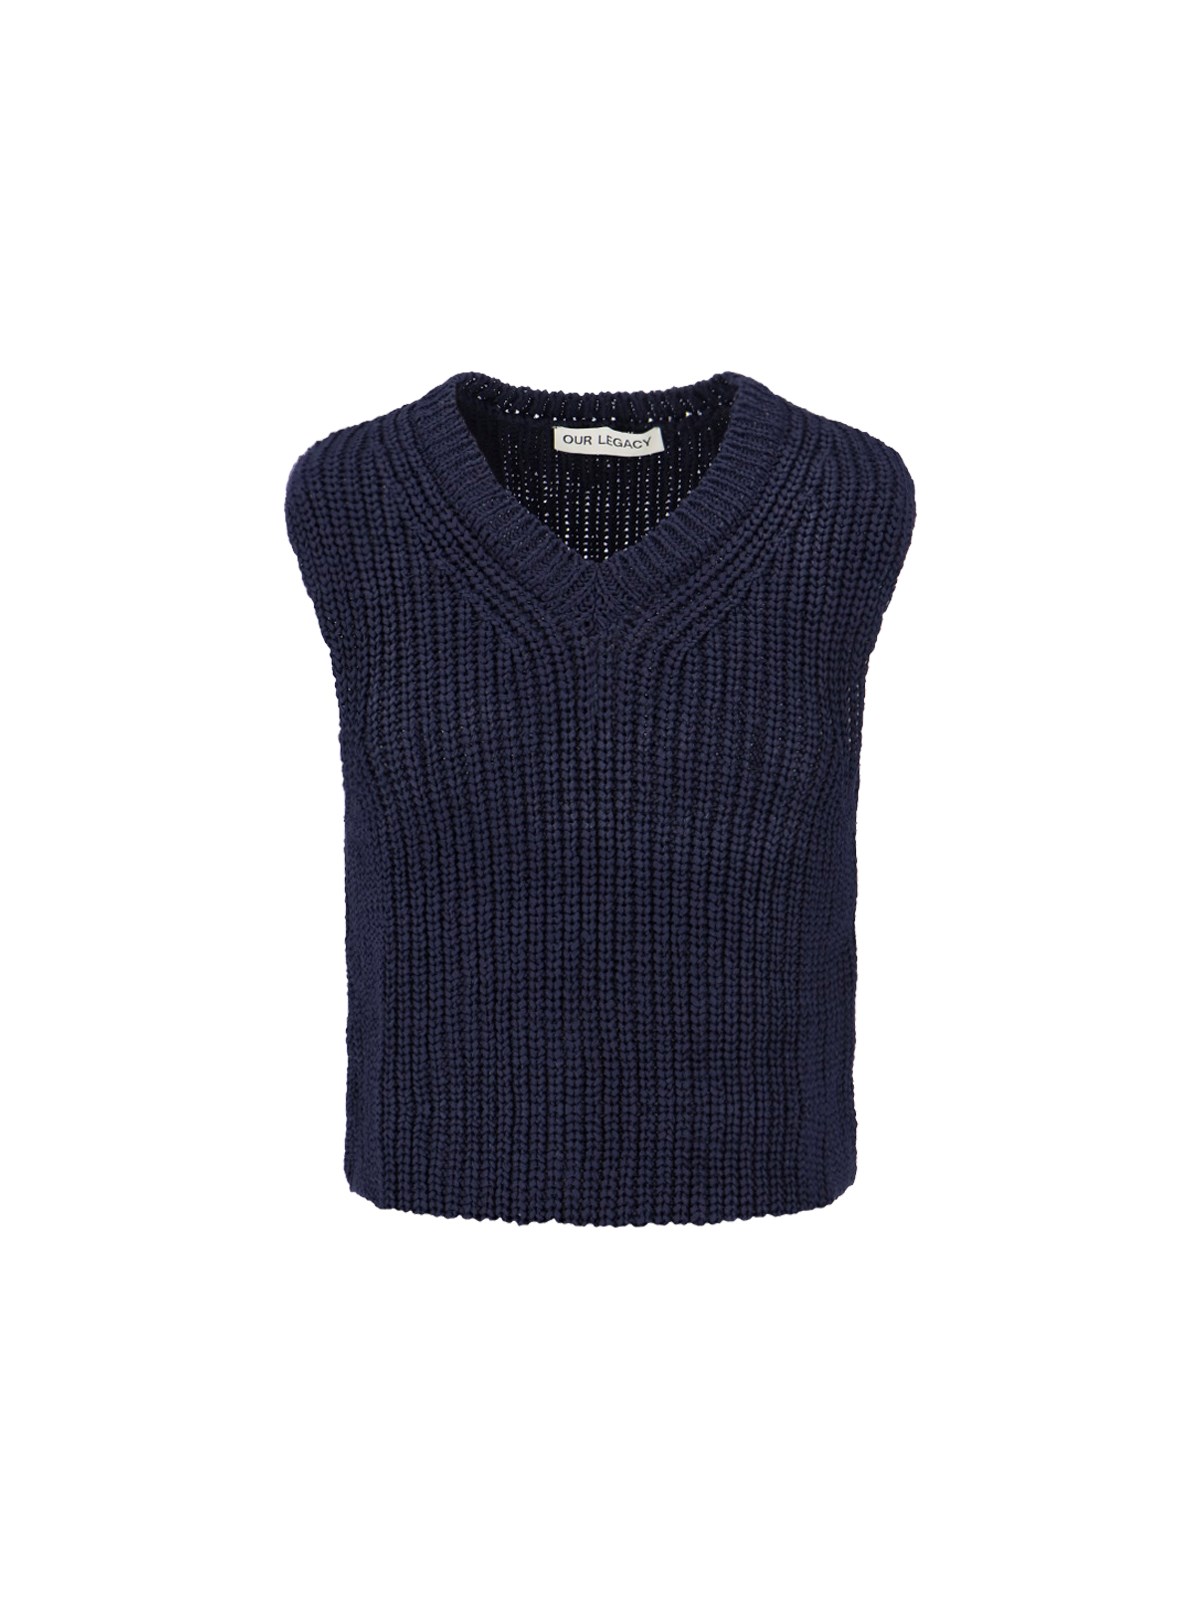 OUR LEGACY 'INTACT' SLEEVELESS SWEATER